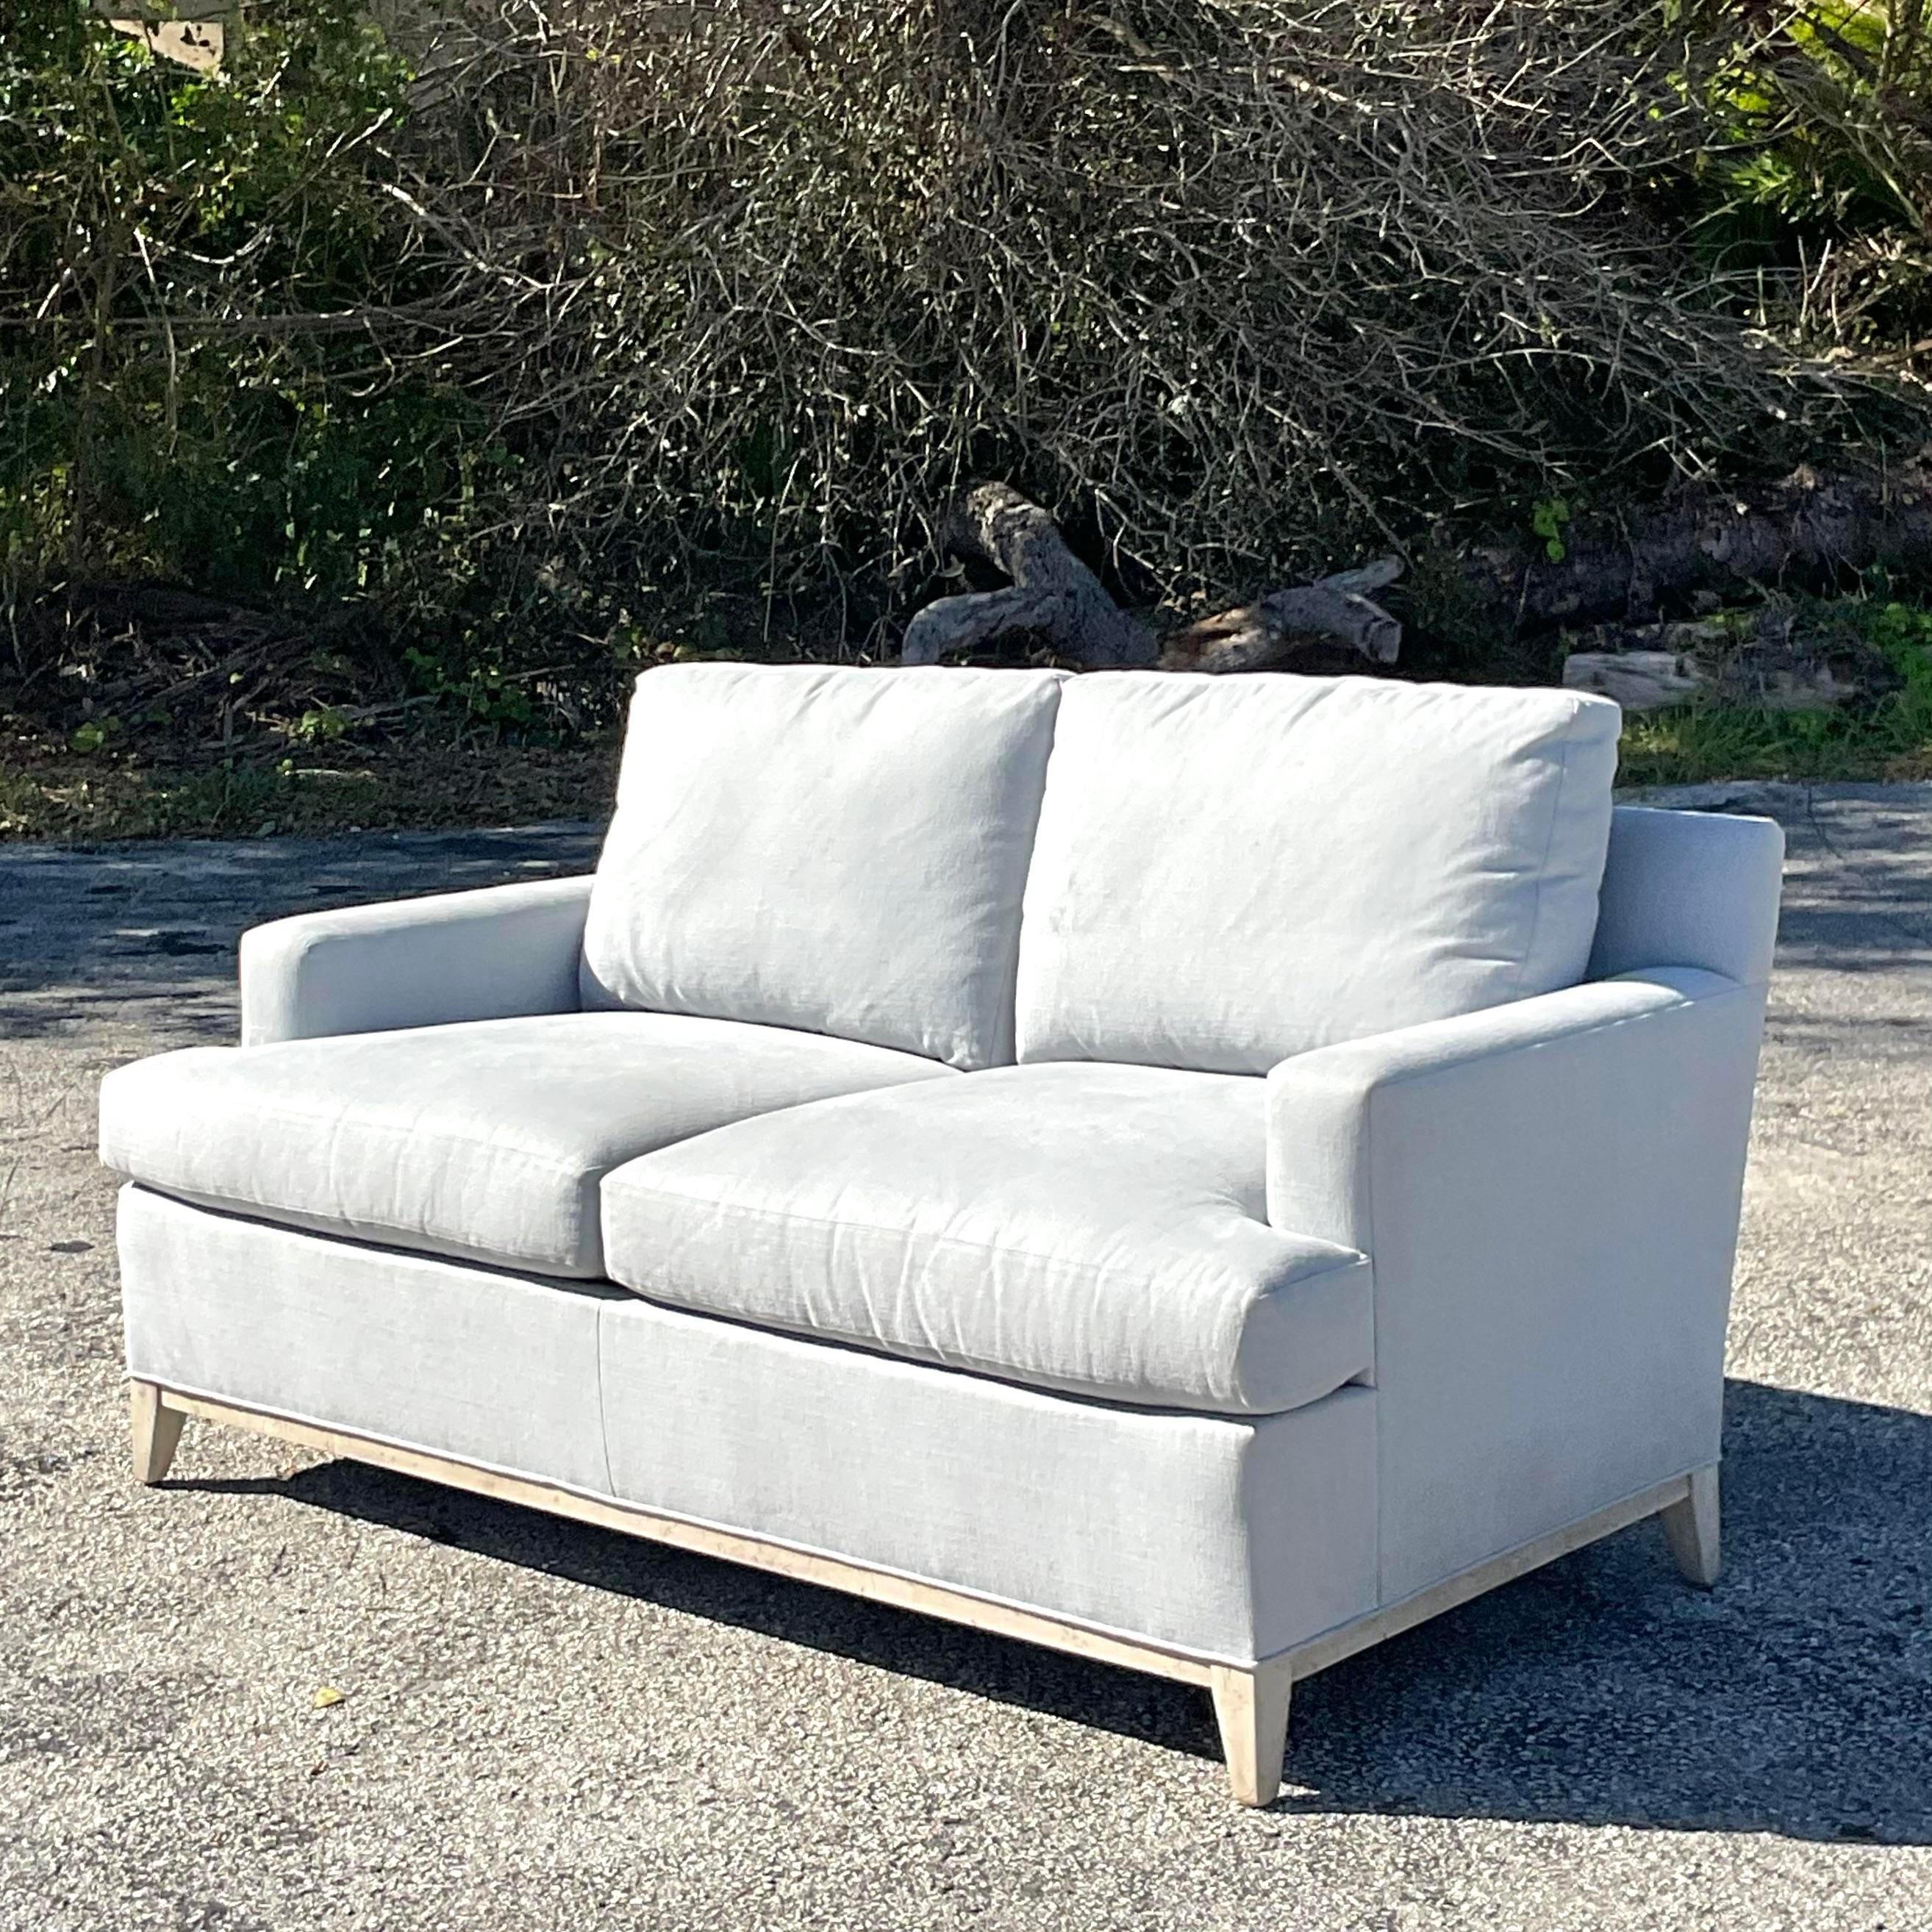 A fabulous vintage Coastal sofa. A chic pale blue on a custom built frame. Bigger than a loveseat, but a petite sofa. Super stylish. Acquired from a Palm Beach estate.